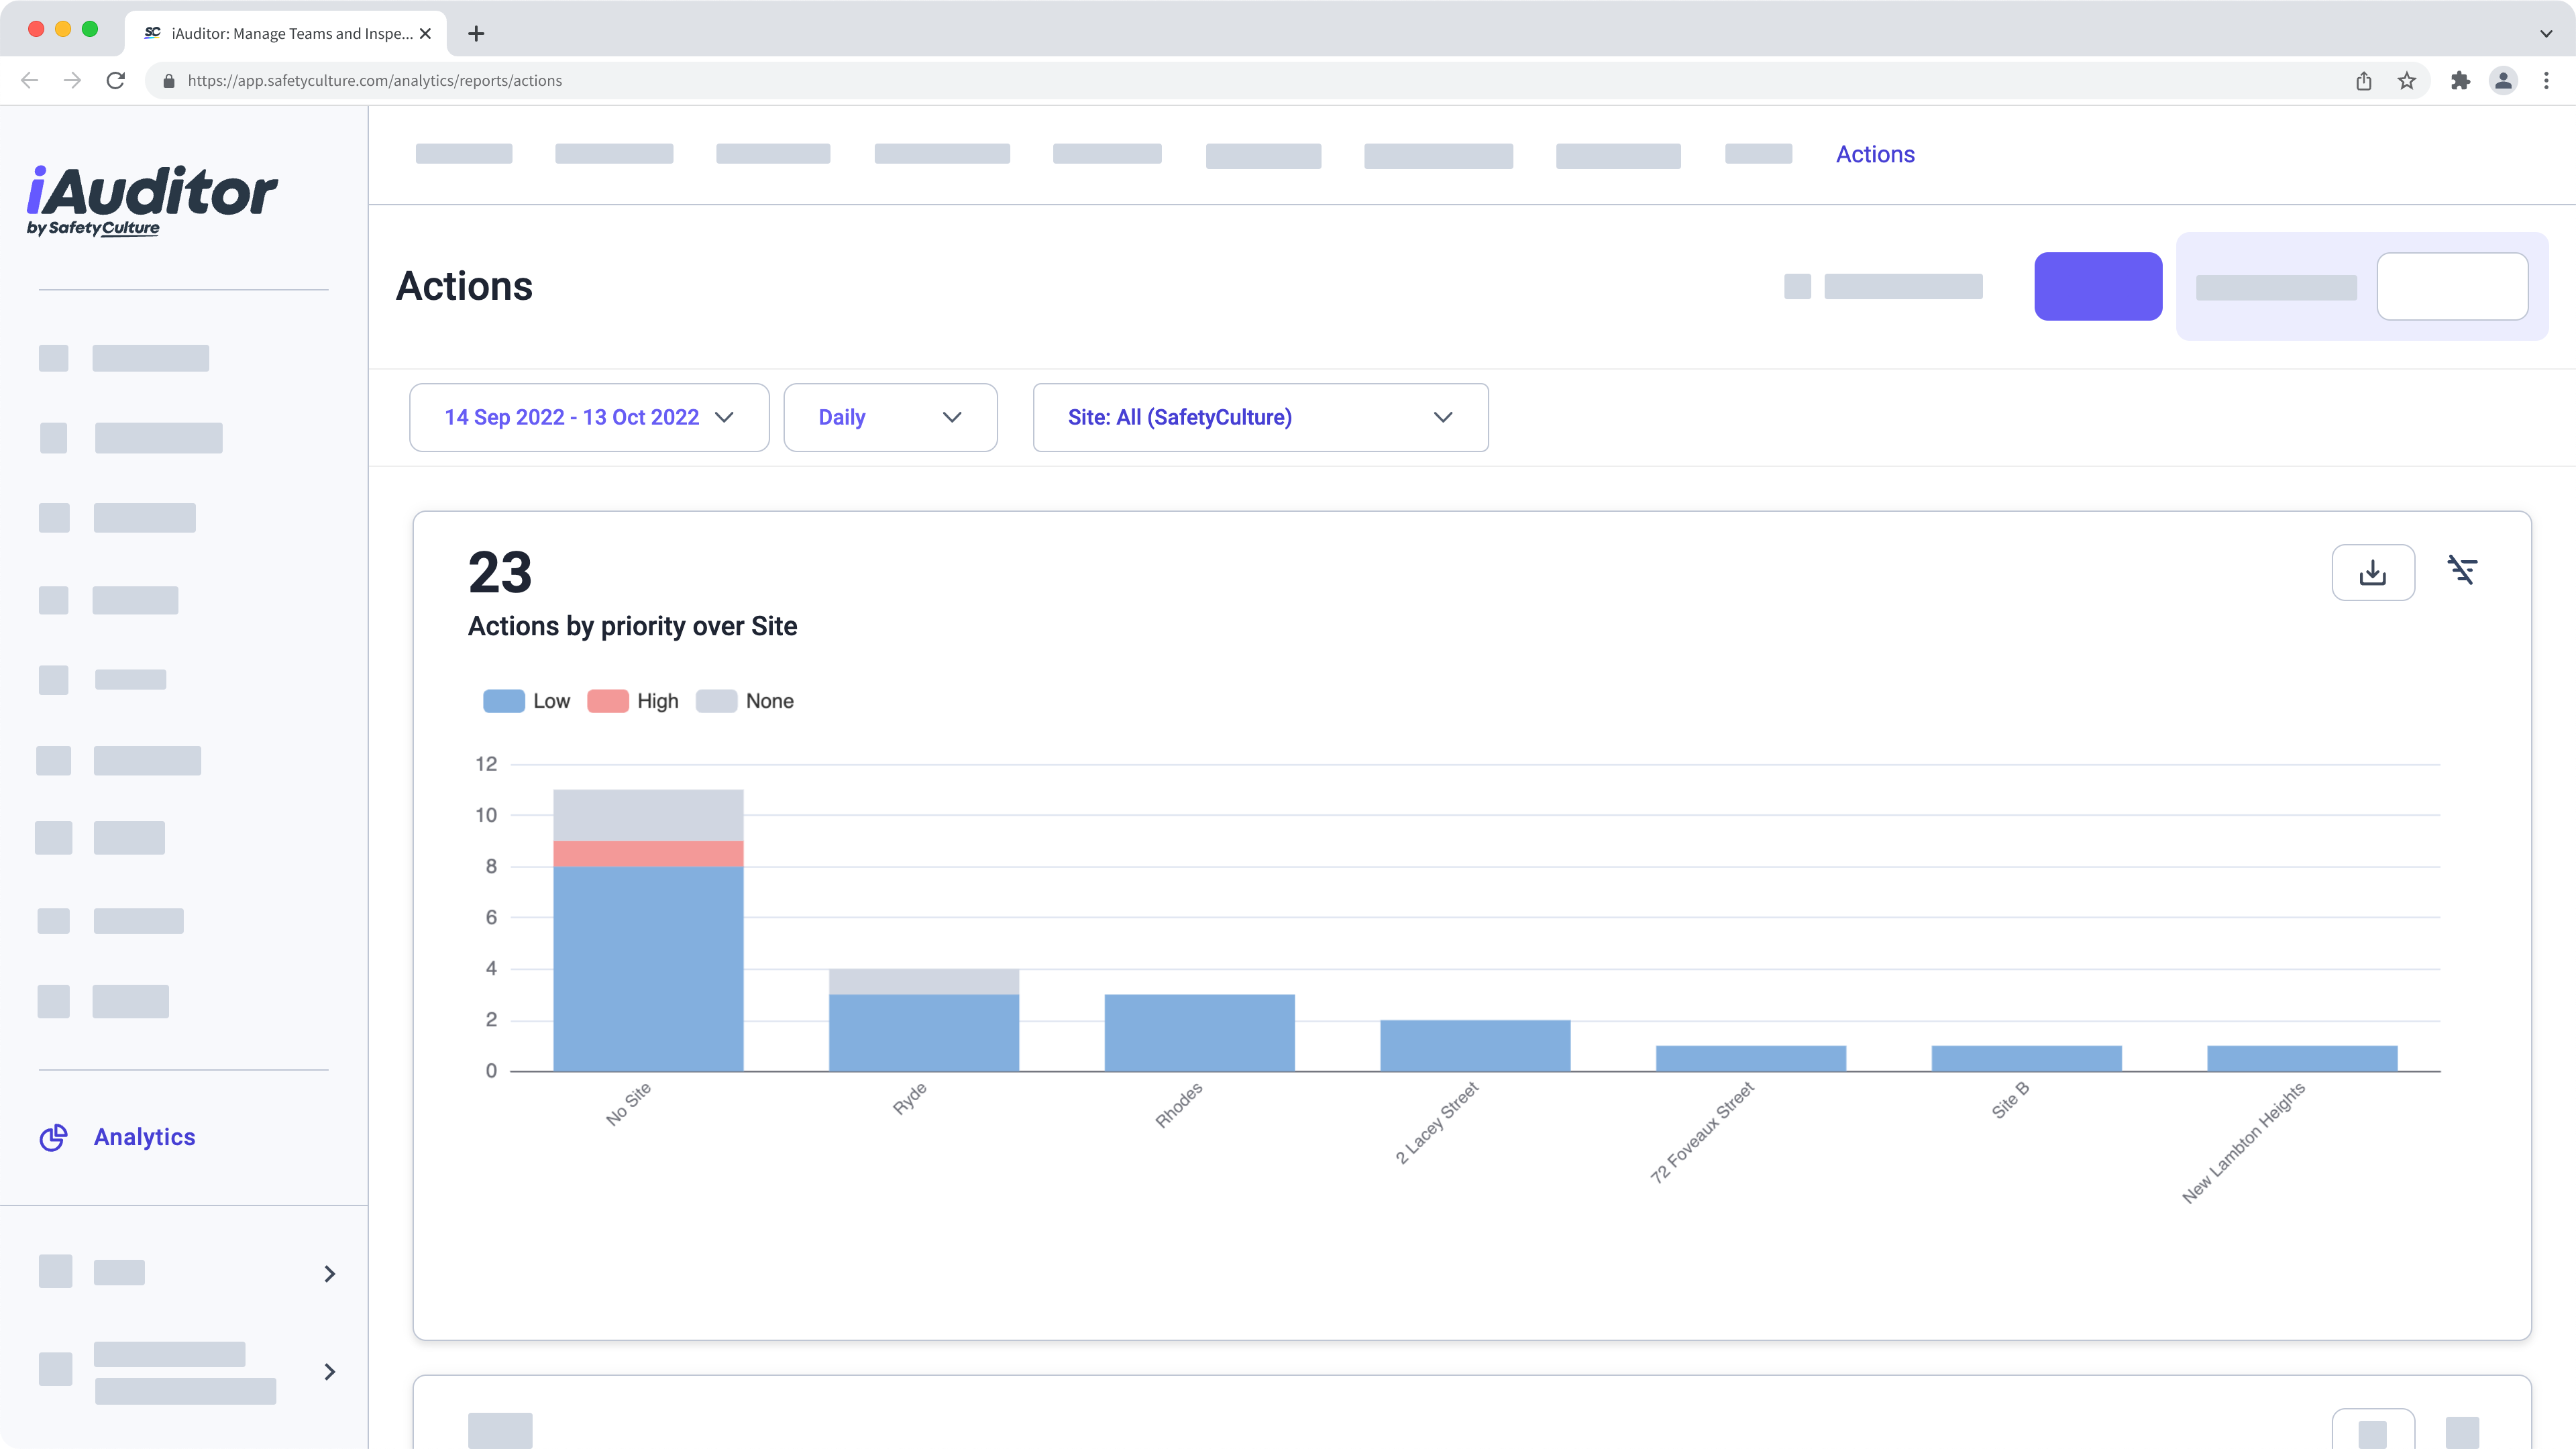 Metrics and attributes on the web app.